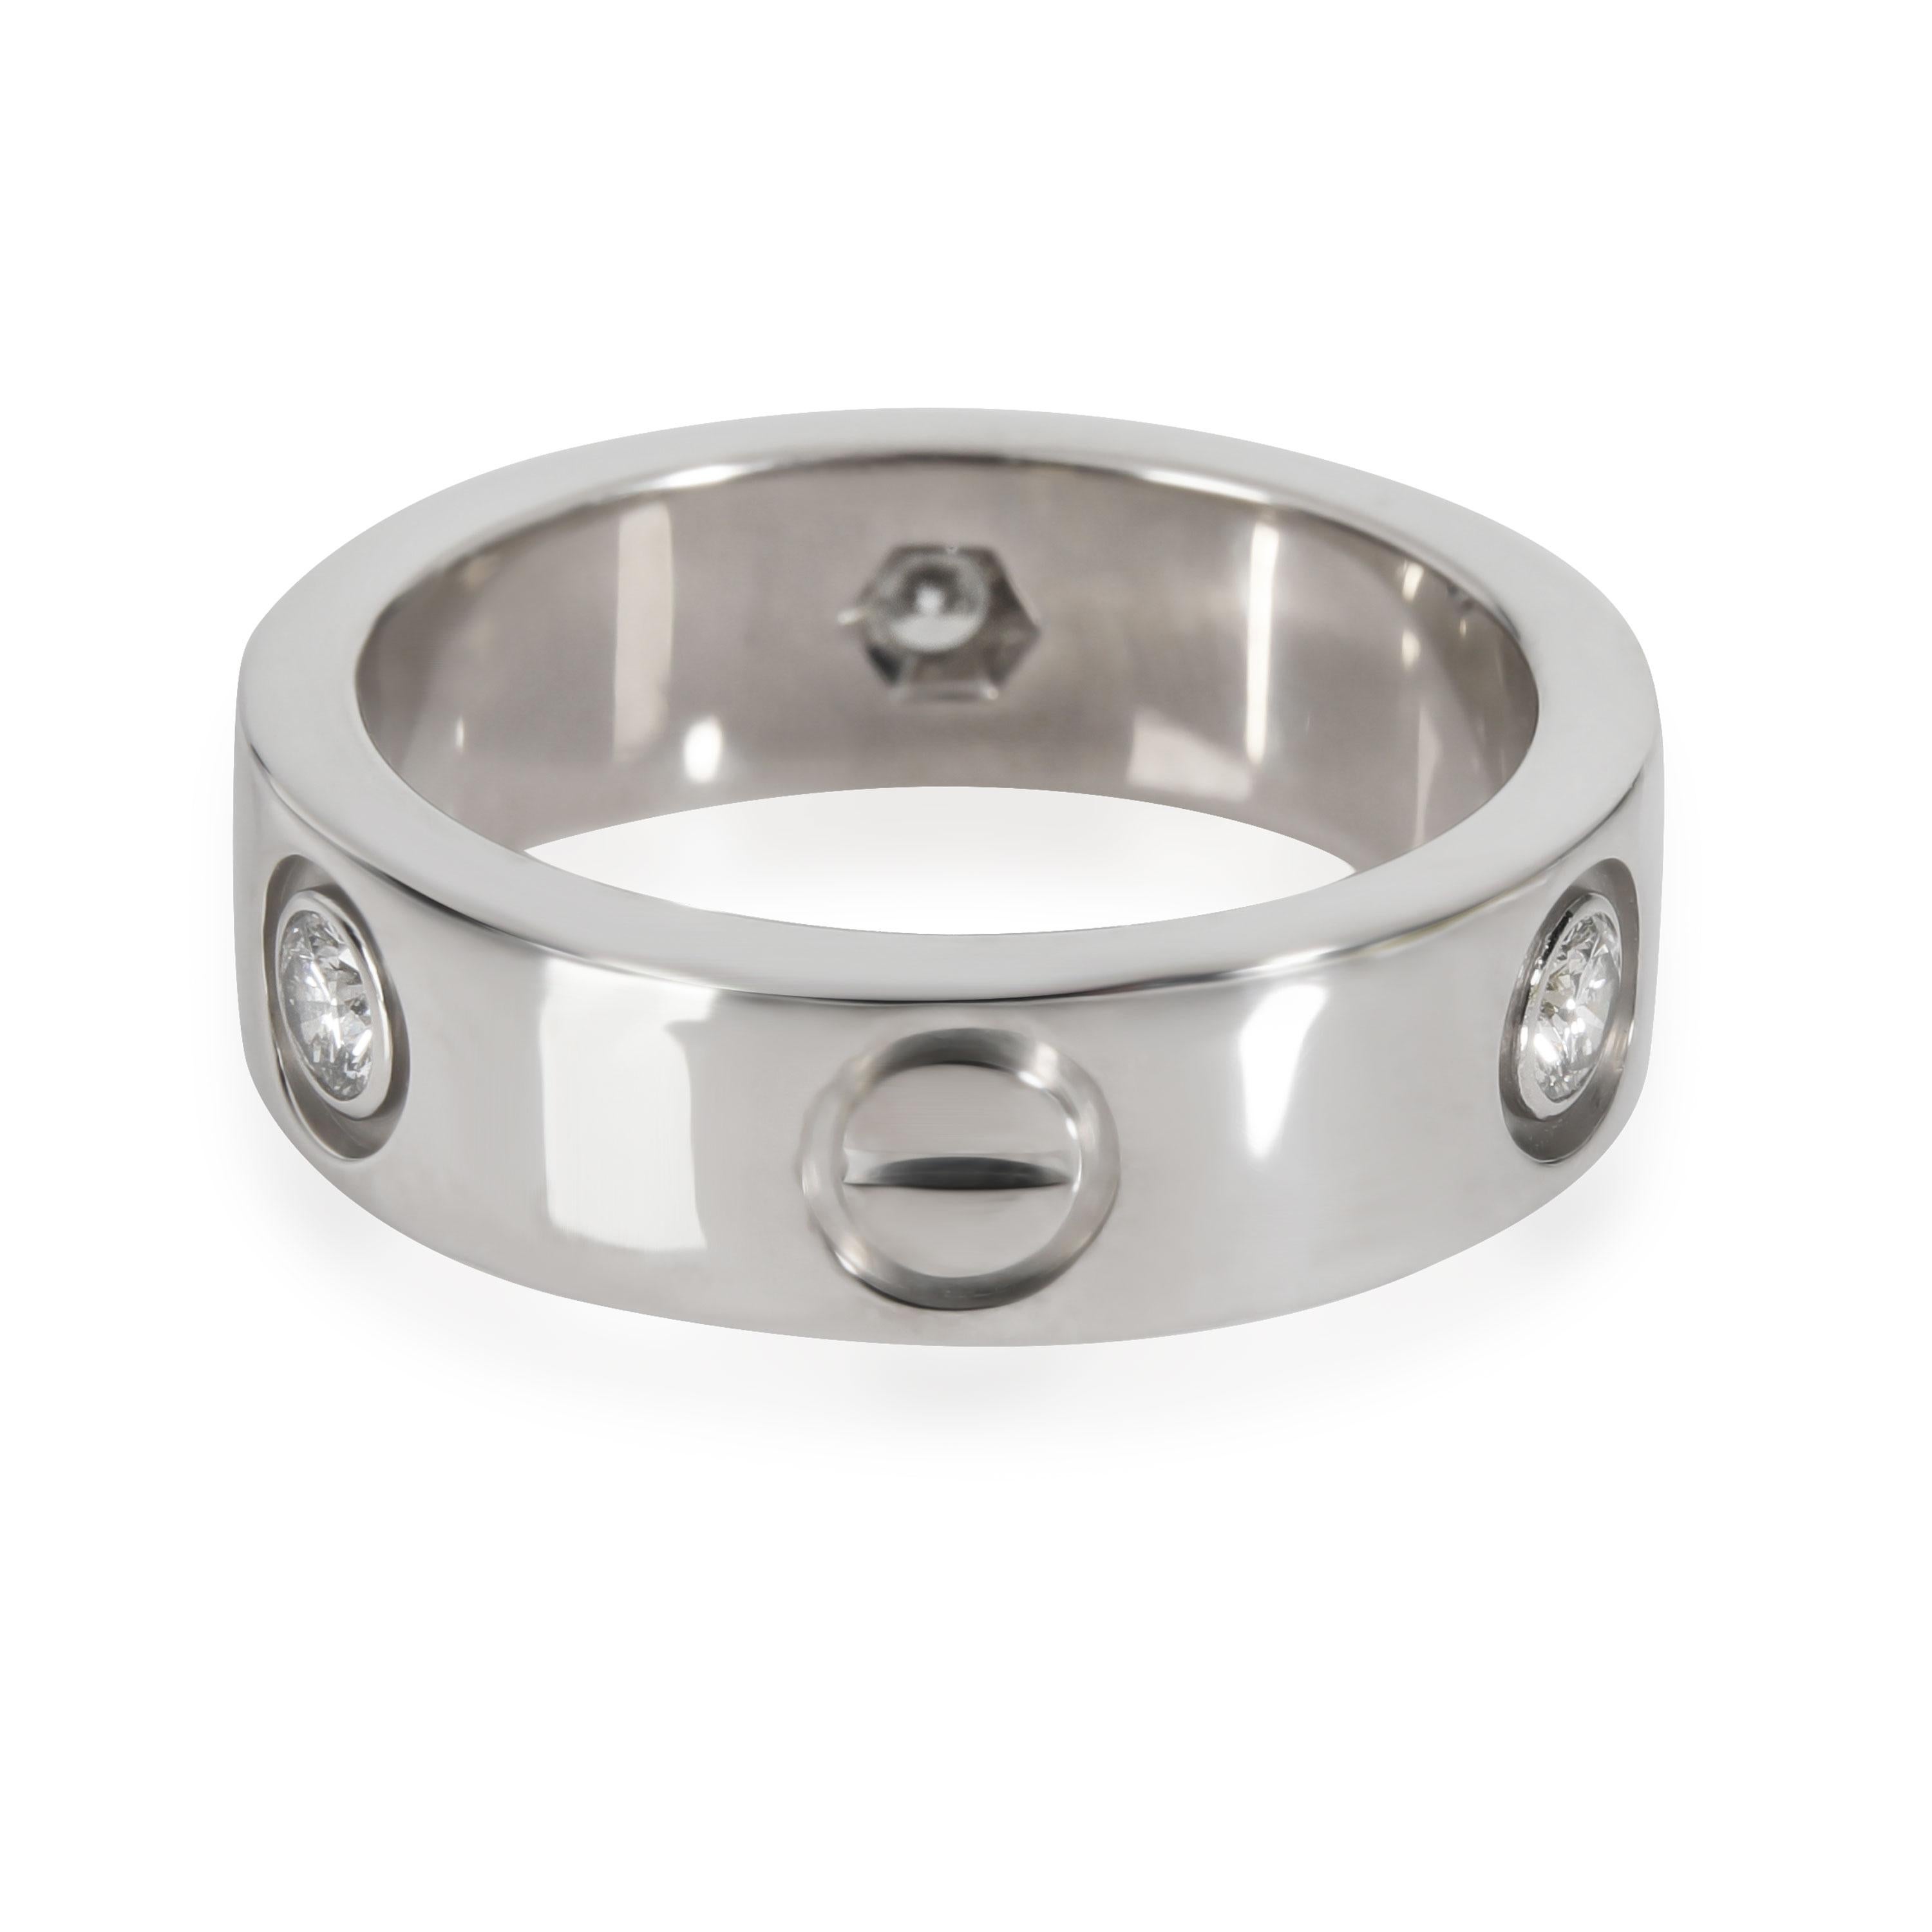 Cartier Love Diamond Ring in 18K White Gold 0.22 CTW

PRIMARY DETAILS
SKU: 112402
Listing Title: Cartier Love Diamond Ring in 18K White Gold 0.22 CTW
Condition Description: Retails for 4100 USD. In excellent condition and recently polished. The ring